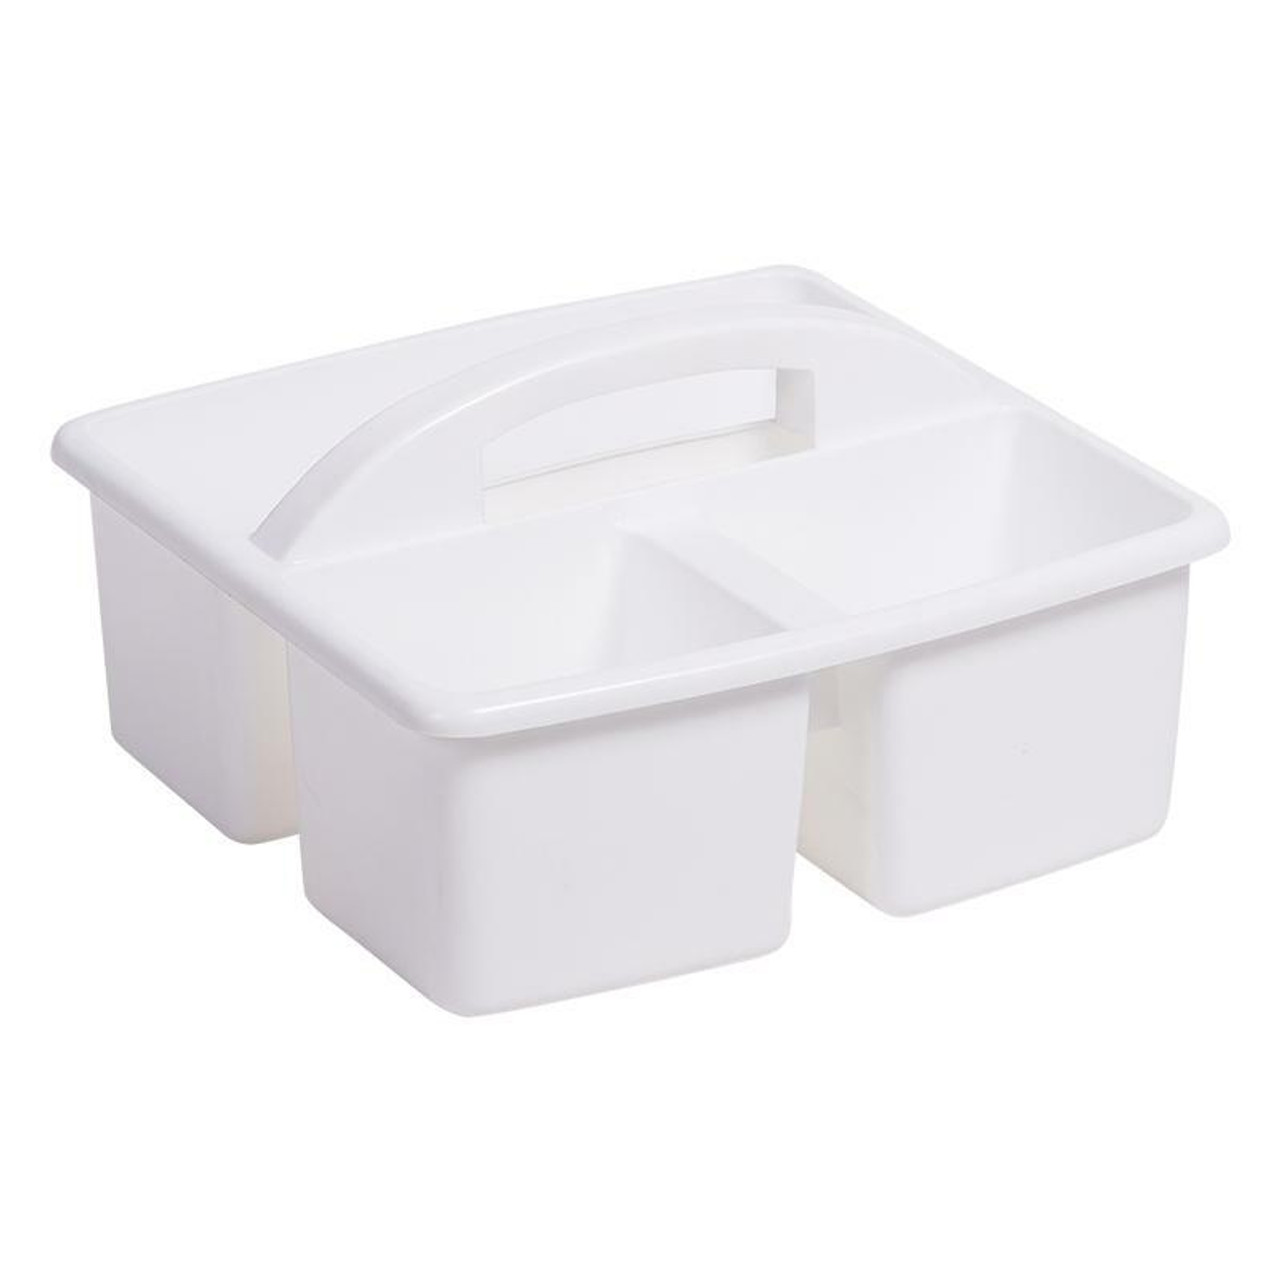 Explore our amazing collection of Small Plastic Caddy Elizabeth